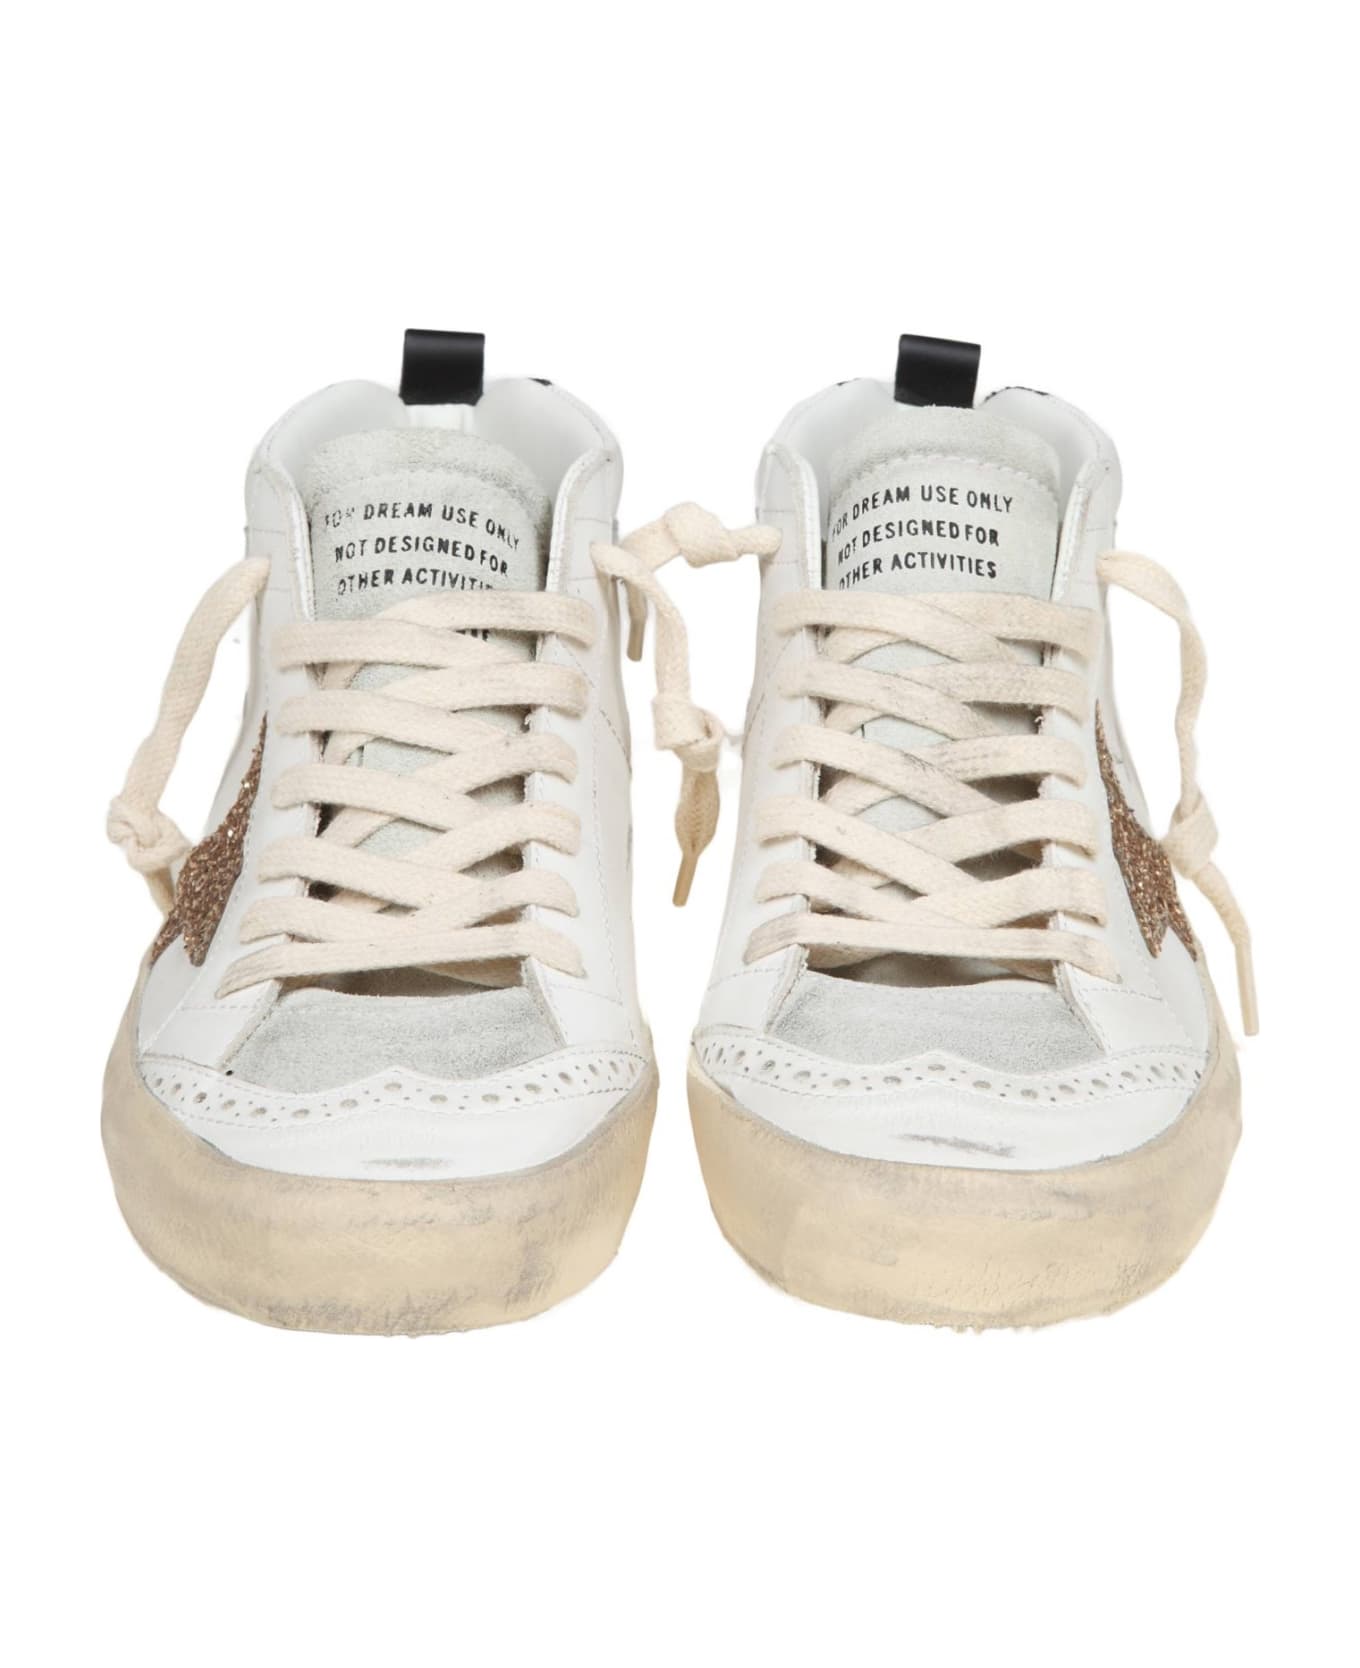 Golden Goose Mid Star In Leather And Suede With Glitter Star - White/Gold スニーカー